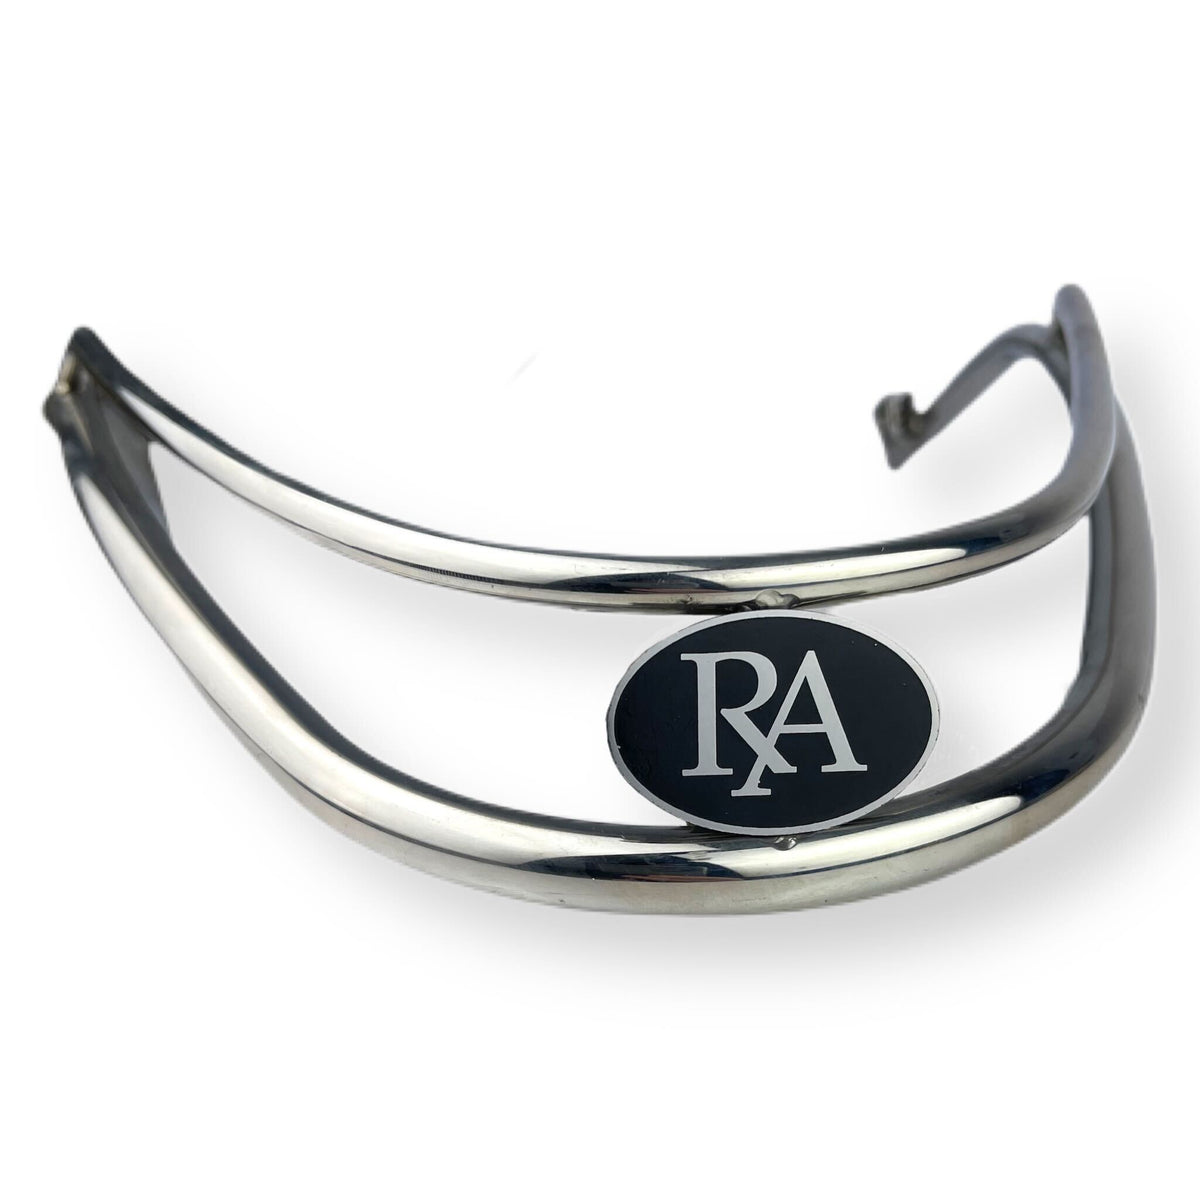 Royal Alloy GP GT 125-300 Front Bumper Bar Curved Trim RA Badge - Polished Stainless Steel